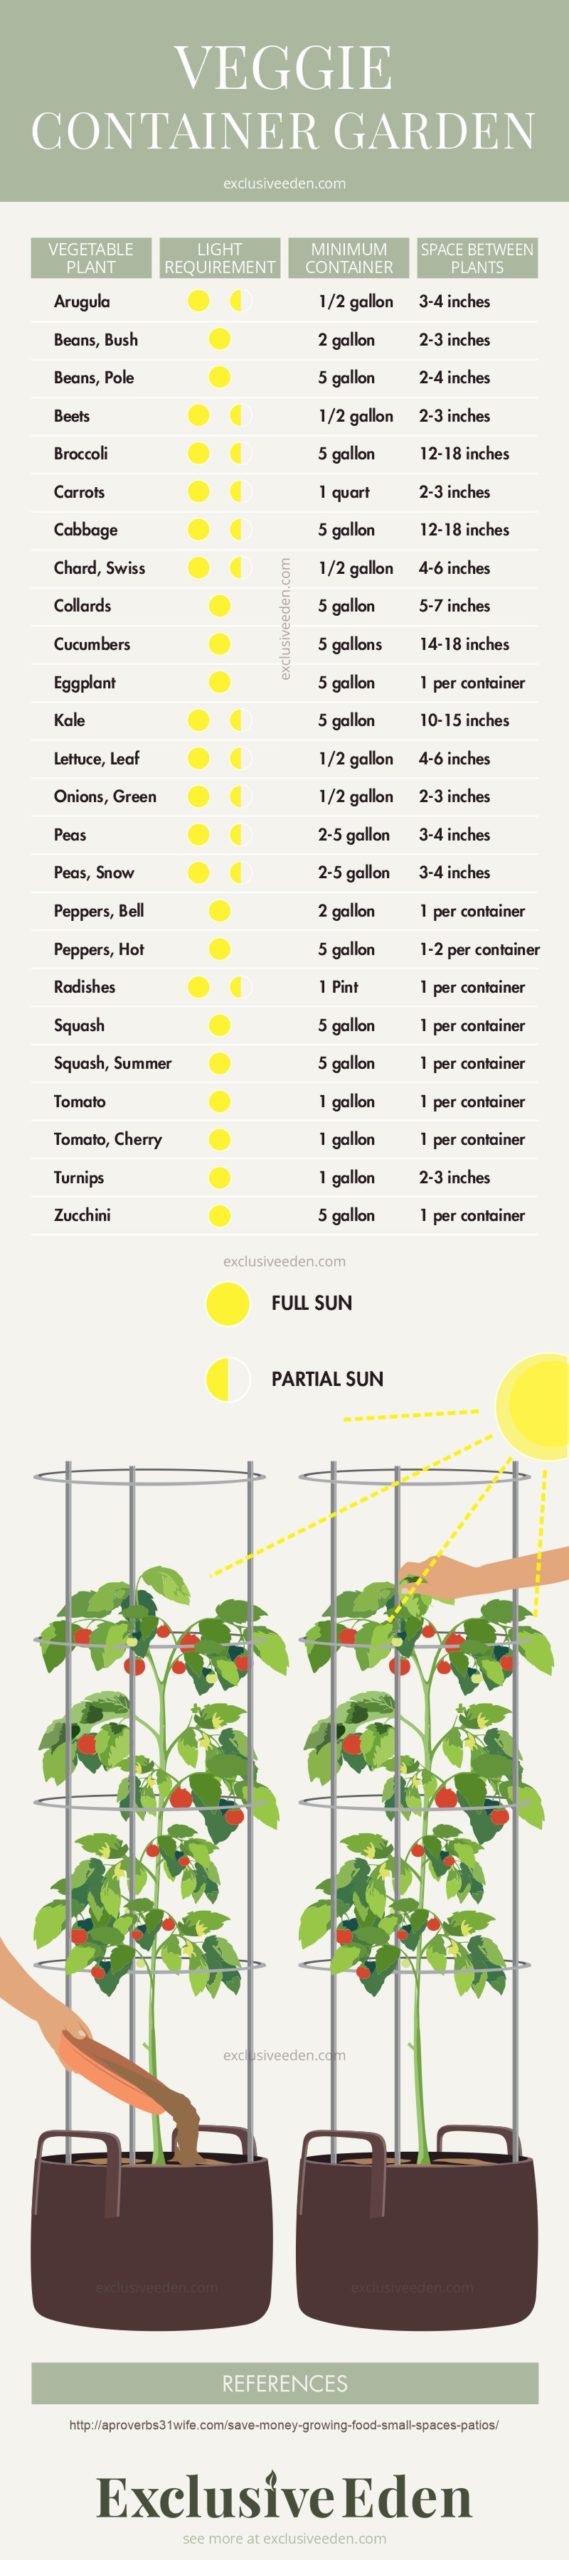 Vegetable container garden illustrated infographic guide.